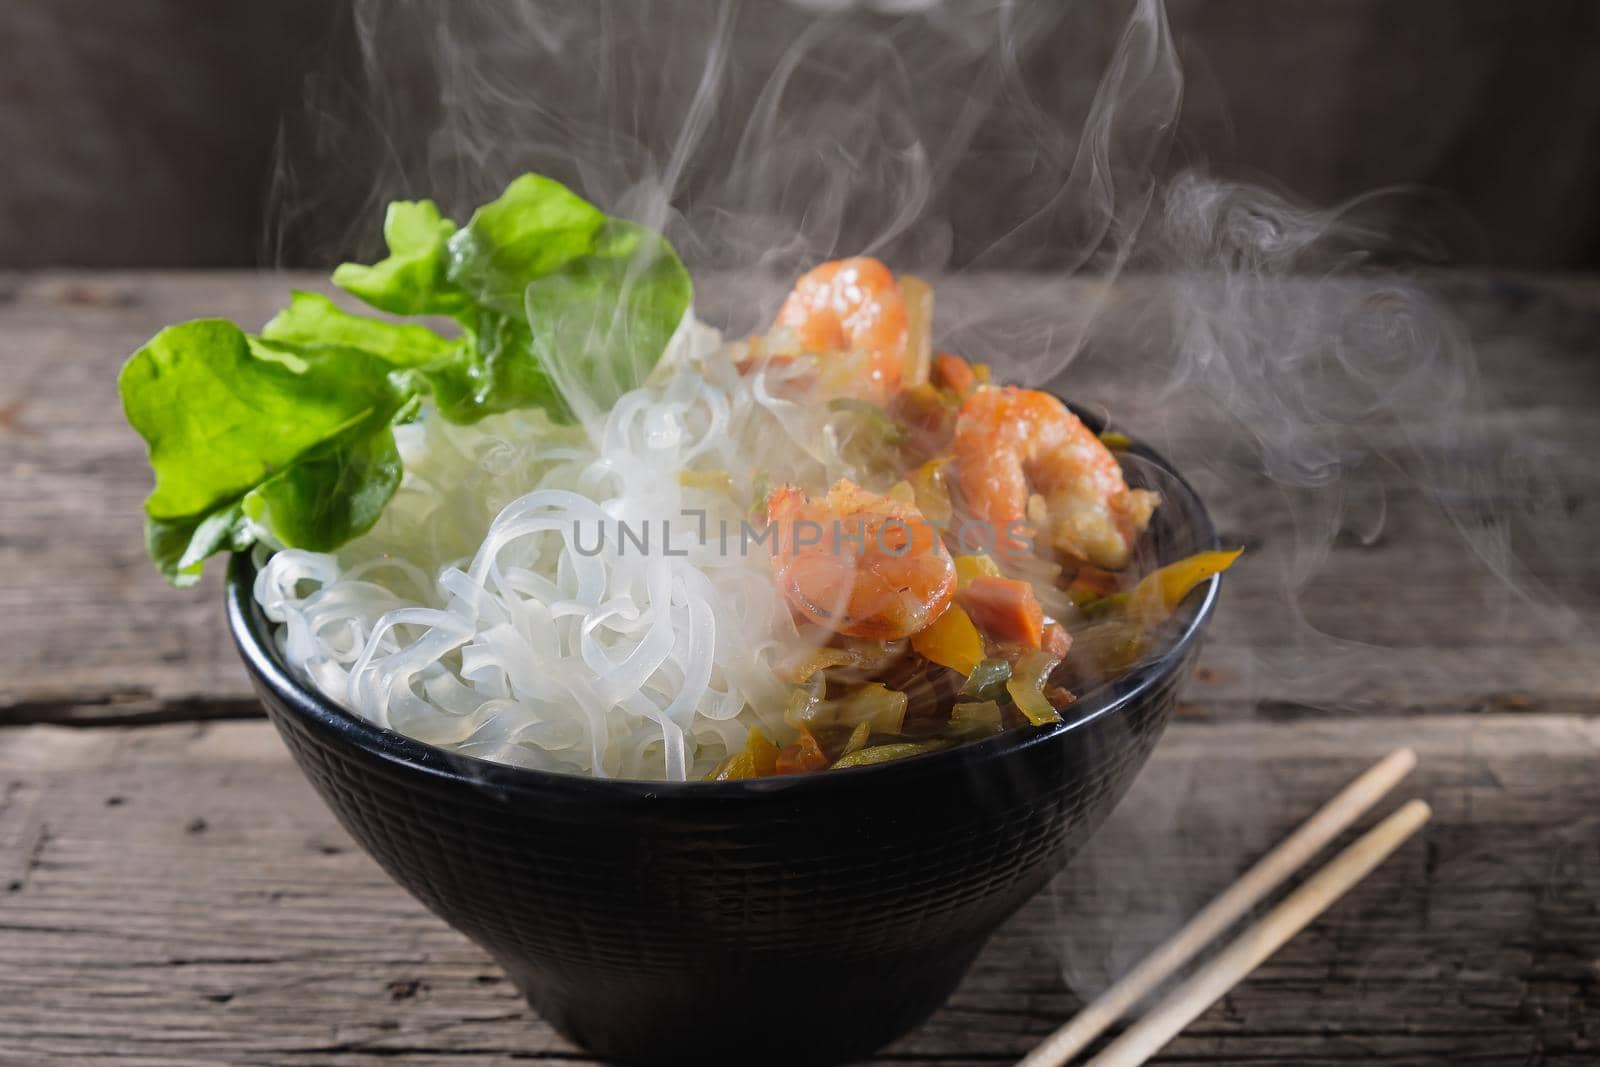 A plate of rice noodles stands on an old wooden table top. Rice noodles are most common in the cuisines of East, Southeast Asia and South Asia. The side dish consists of fried onions, carrots, paprika, shrimp. Copy space. Horizontal orientation